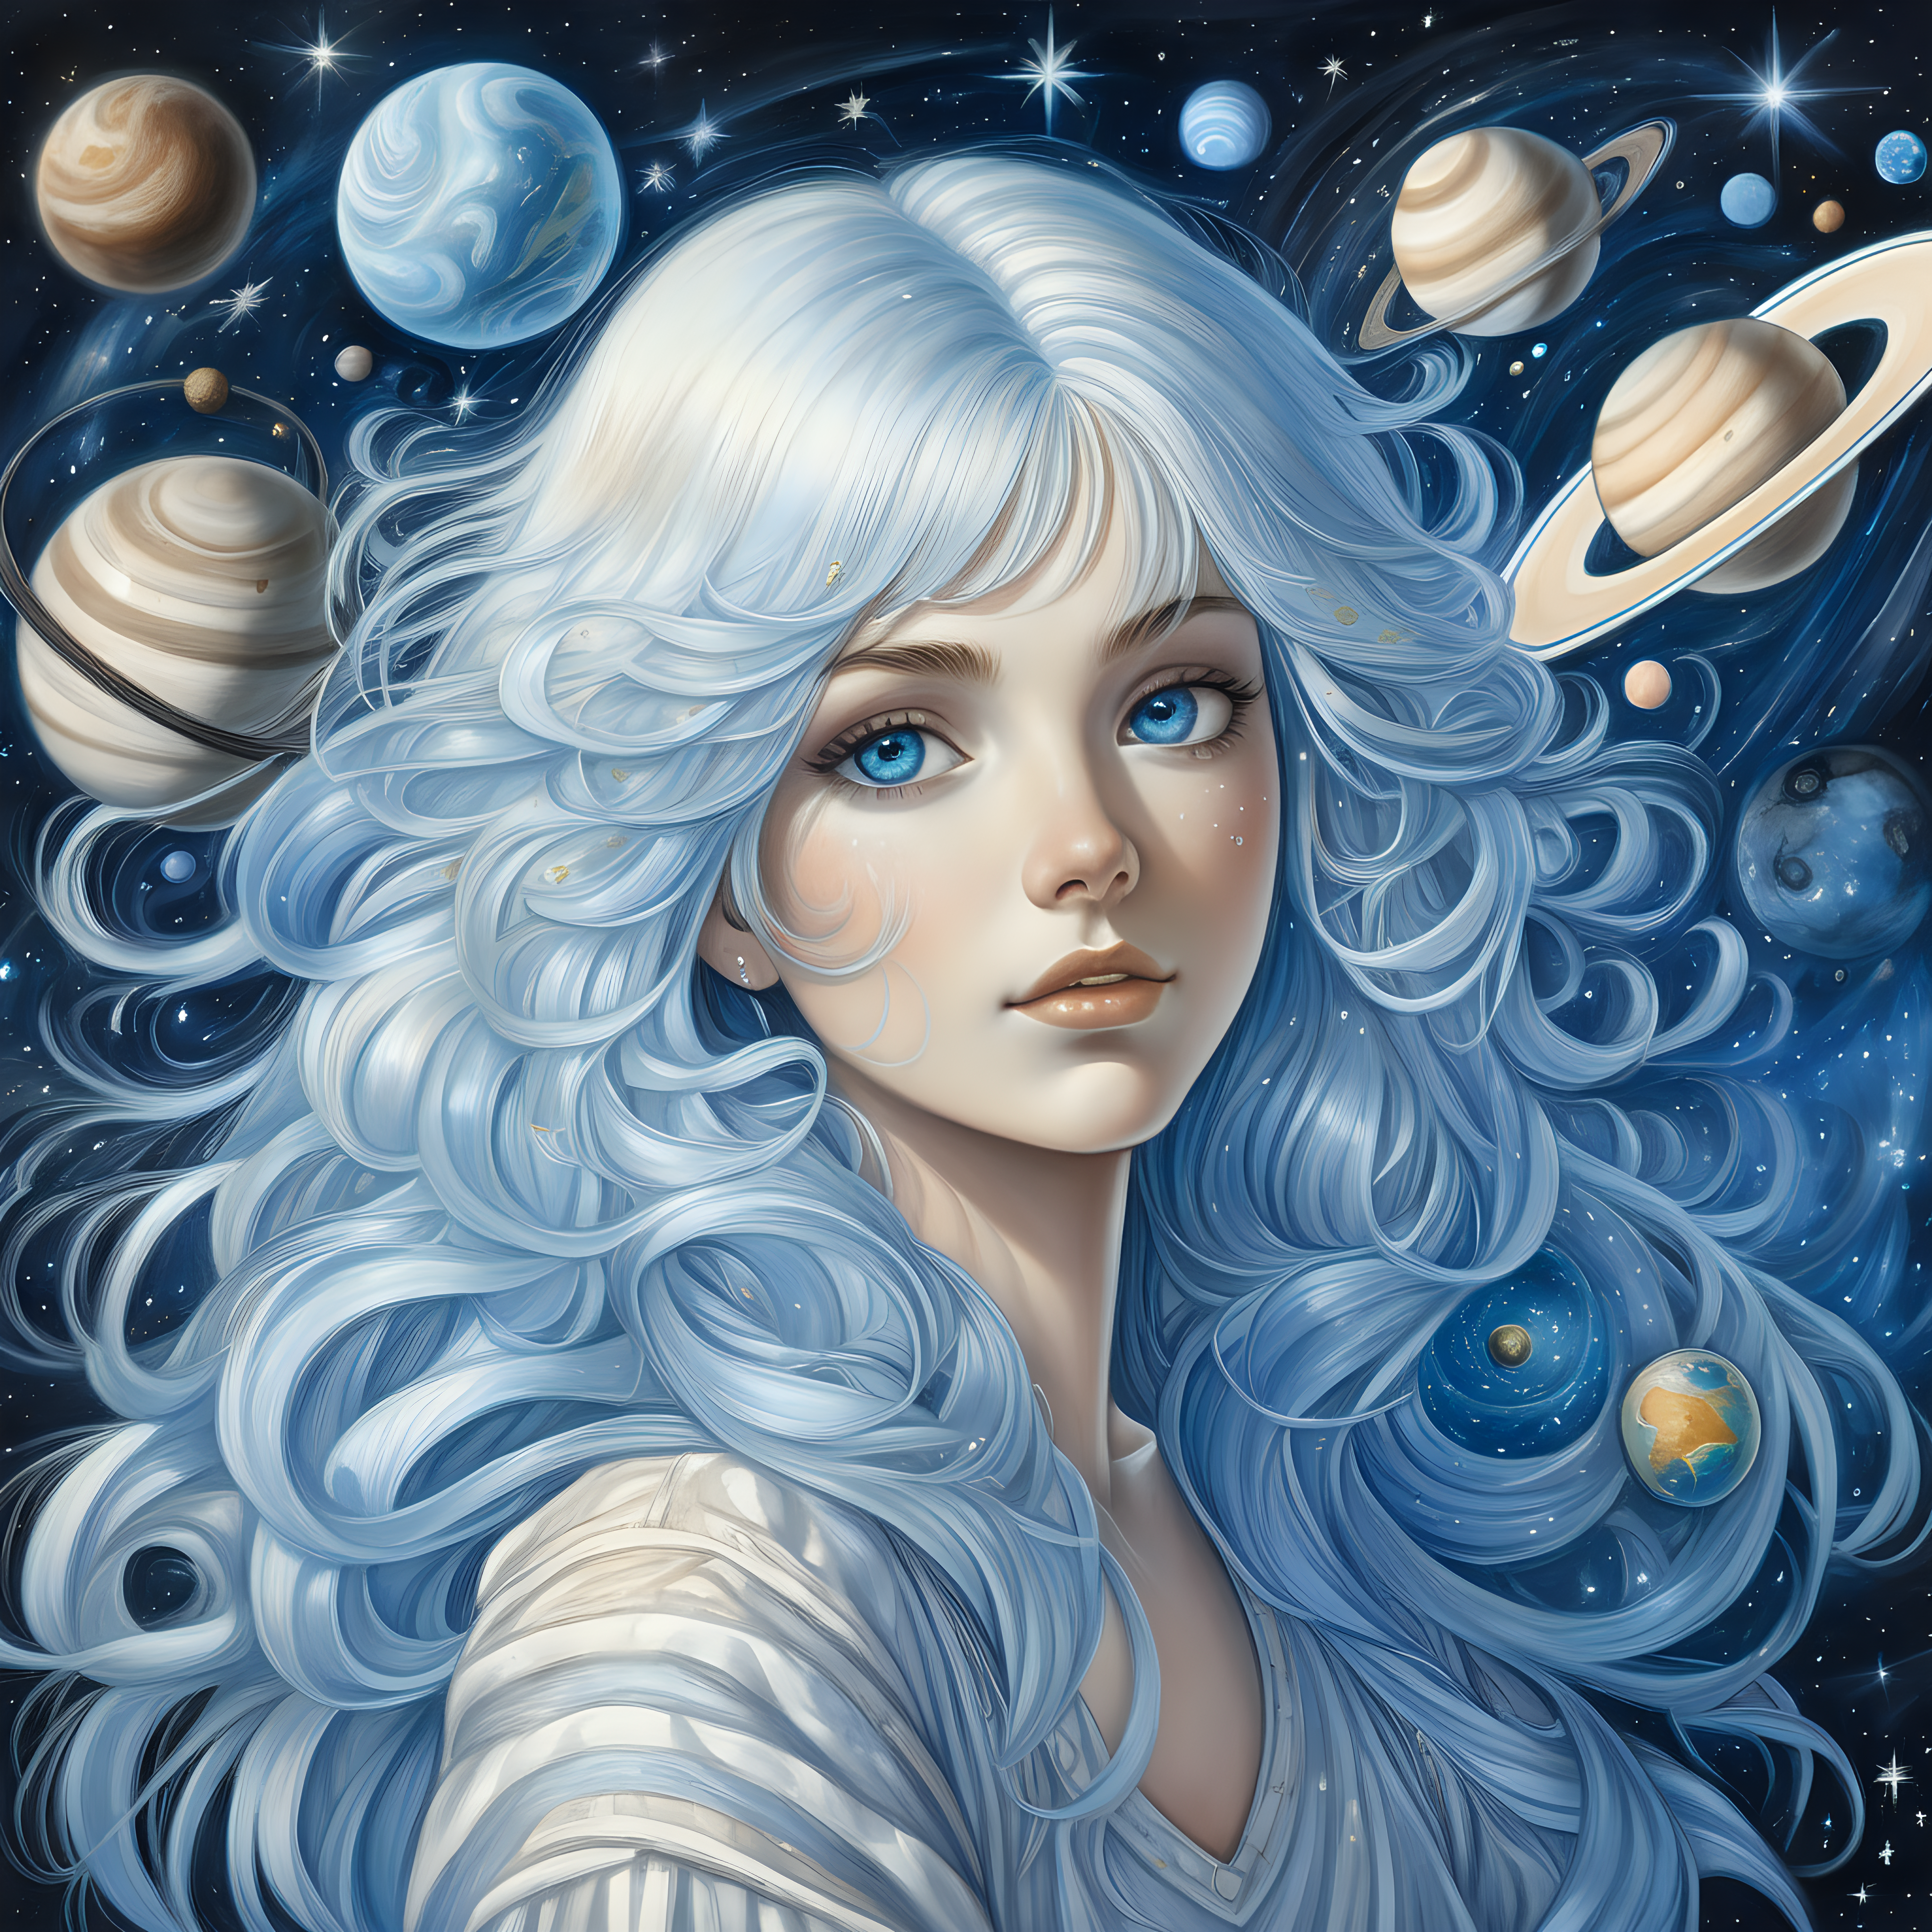 Celestial whote hair blue eyed lady on a starry background surrounded by planets